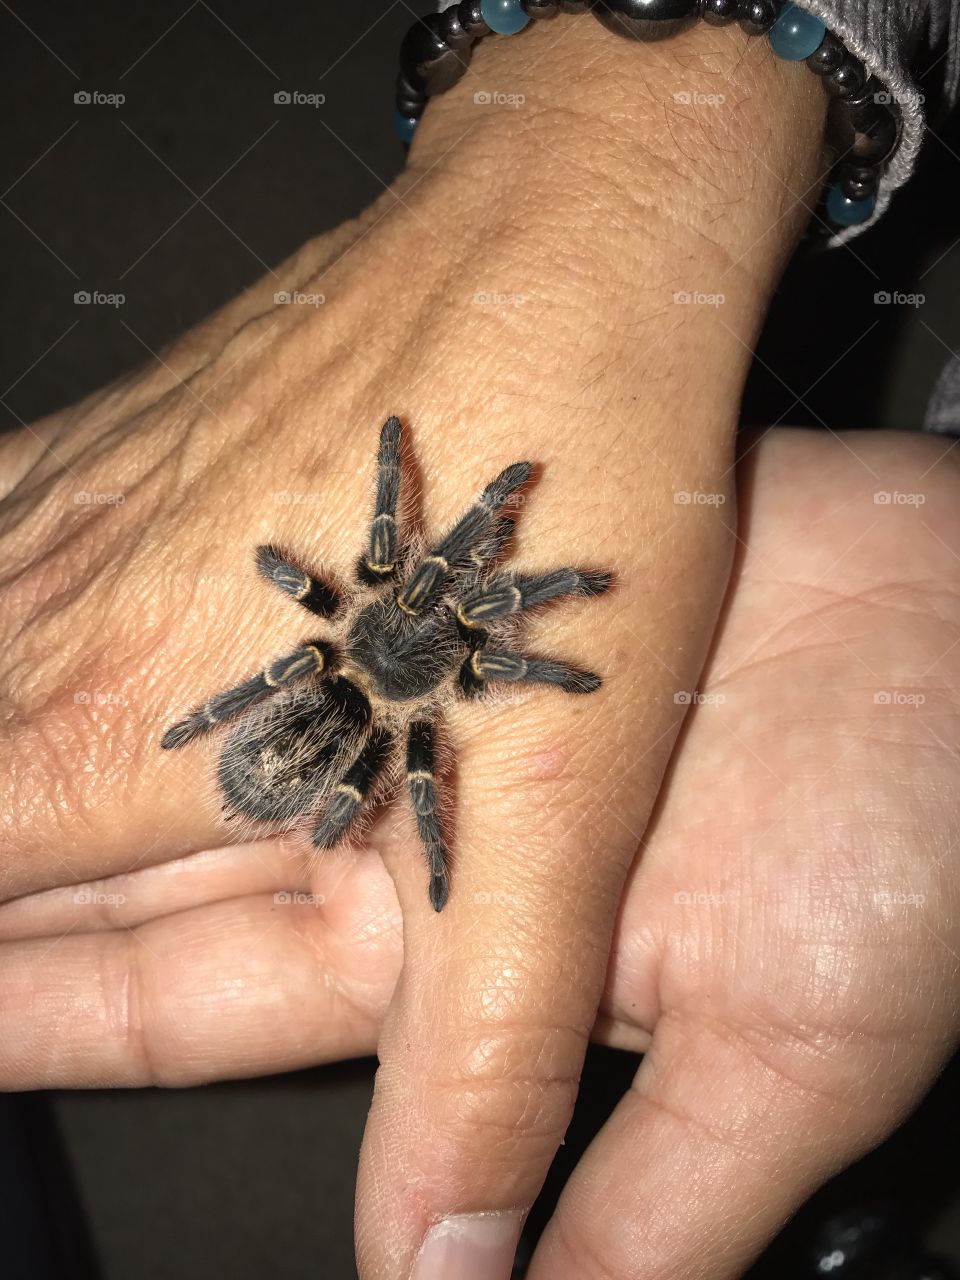 Our baby yellow stripped knees Chilean Tarantula 